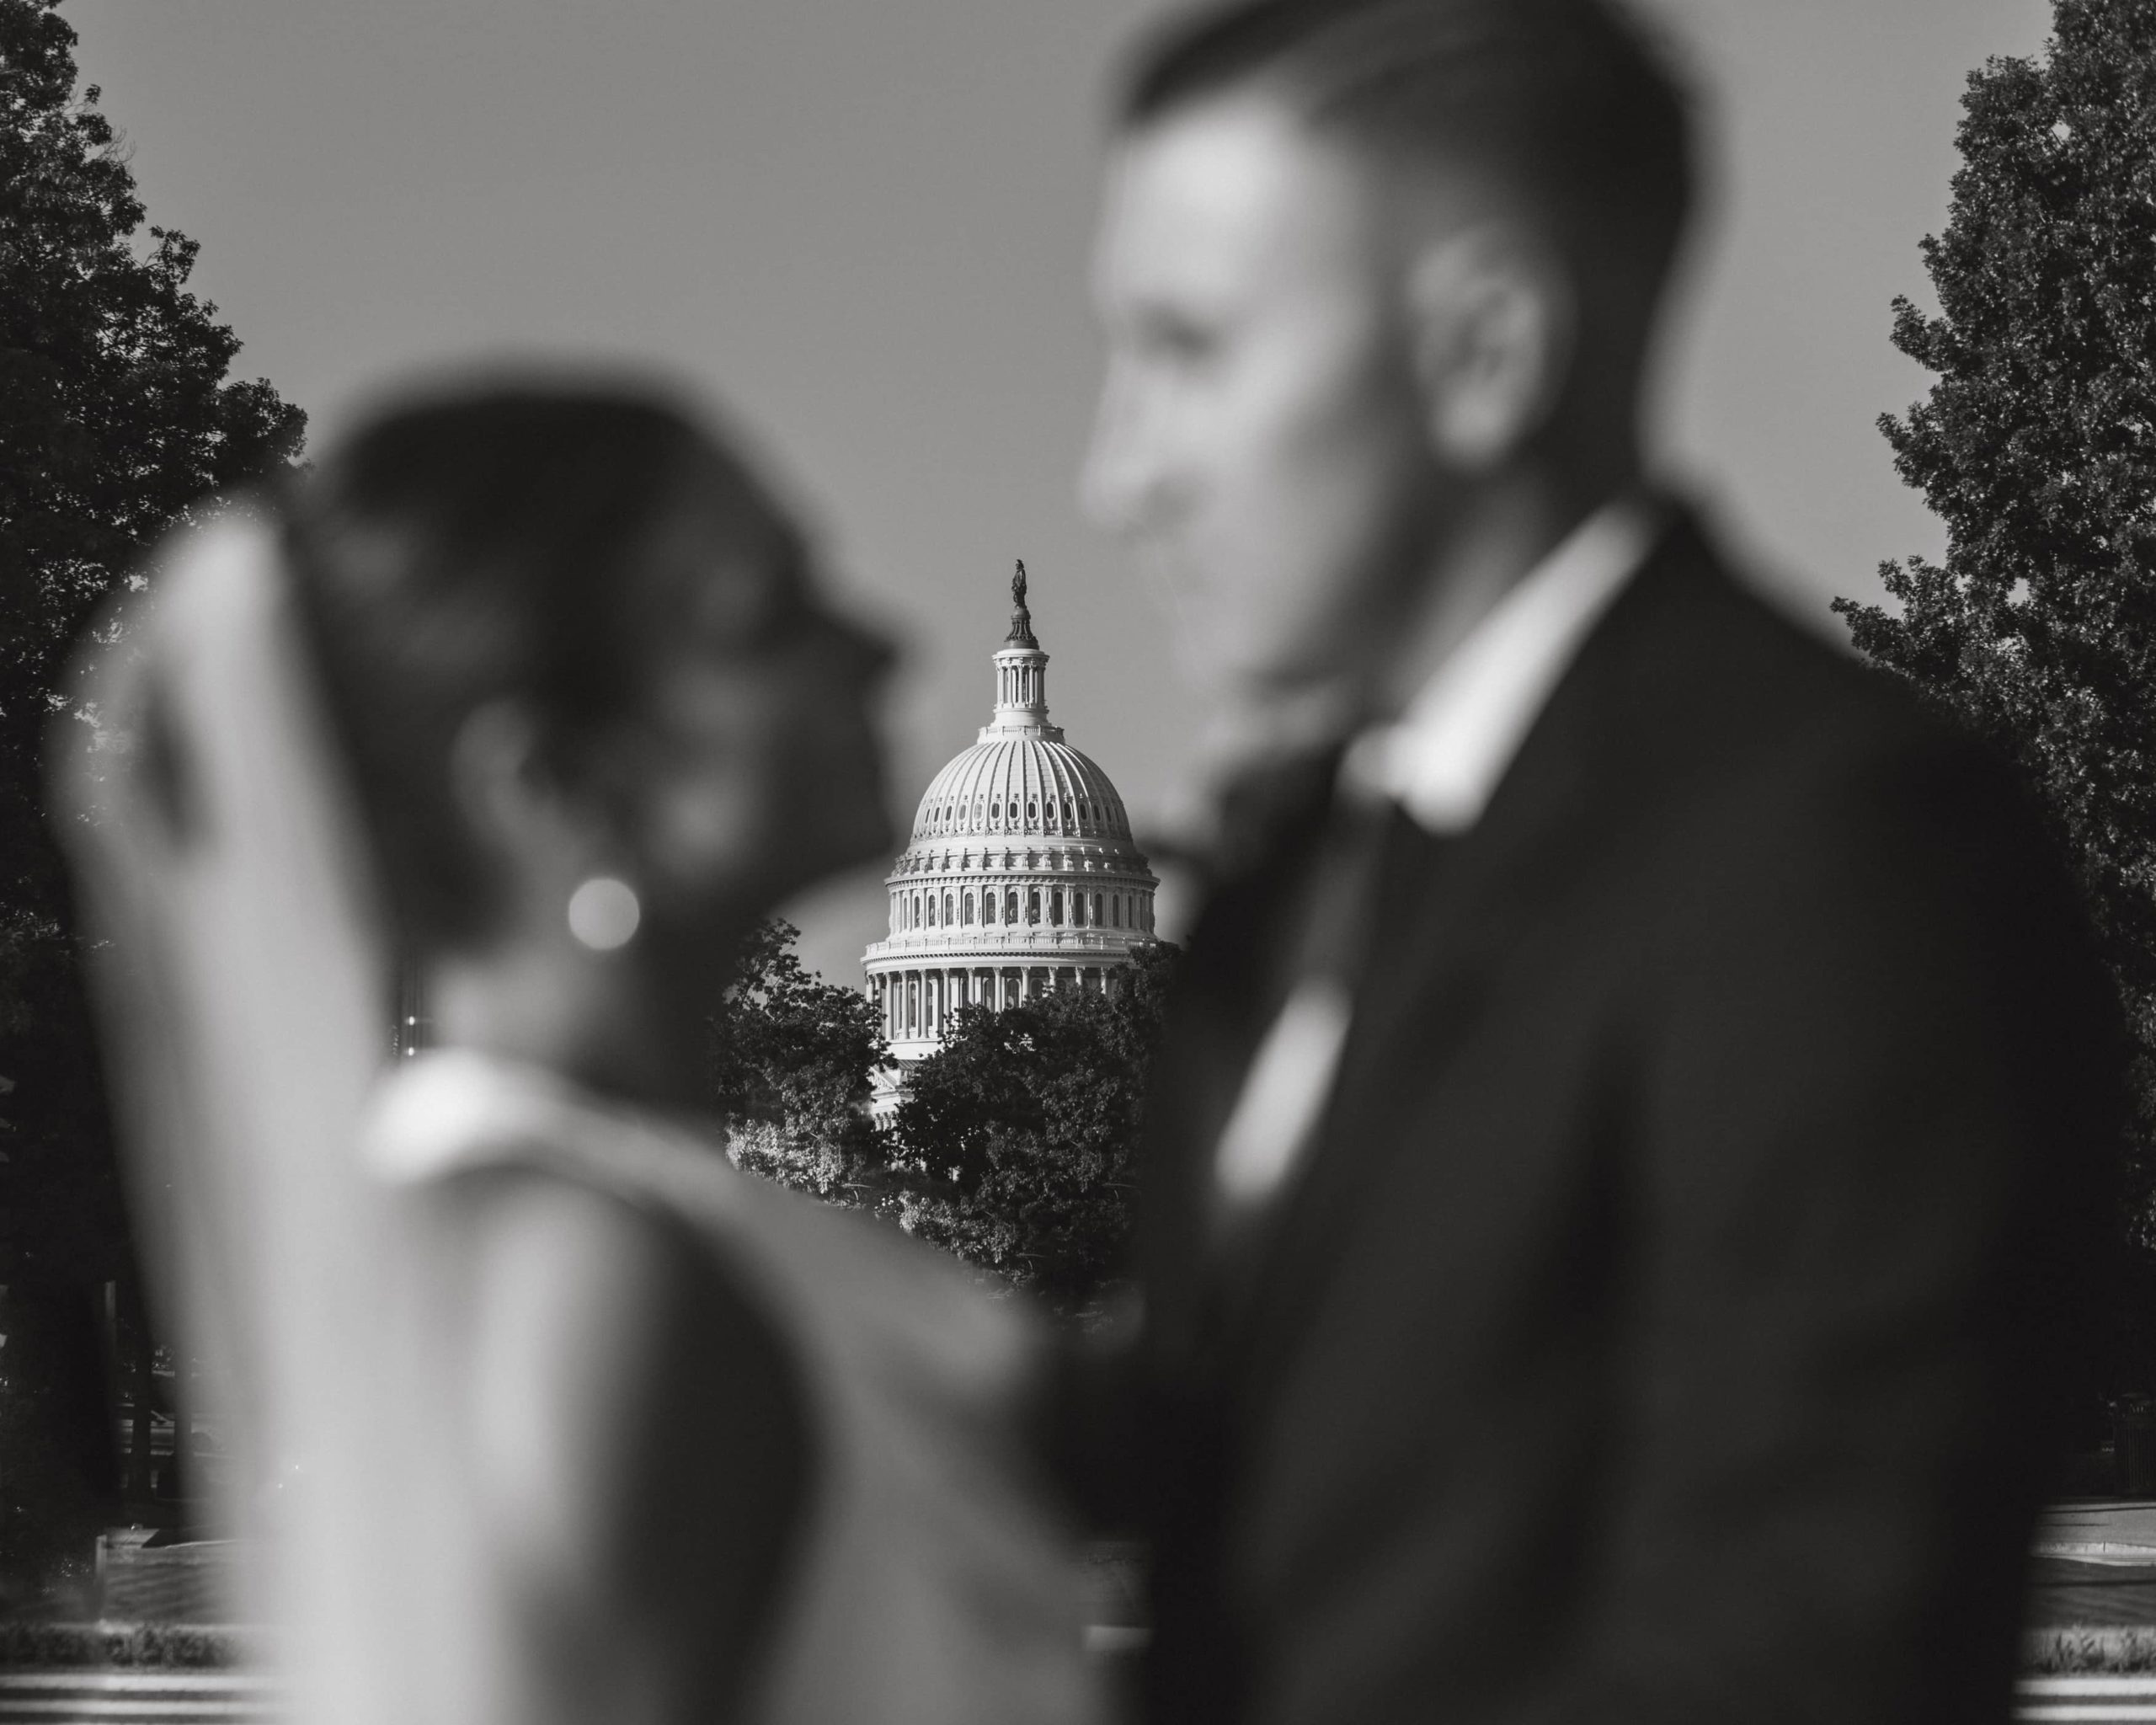 Black and white photo of wedding couple looking at each other with the U.S. Capitol building in focus between them.